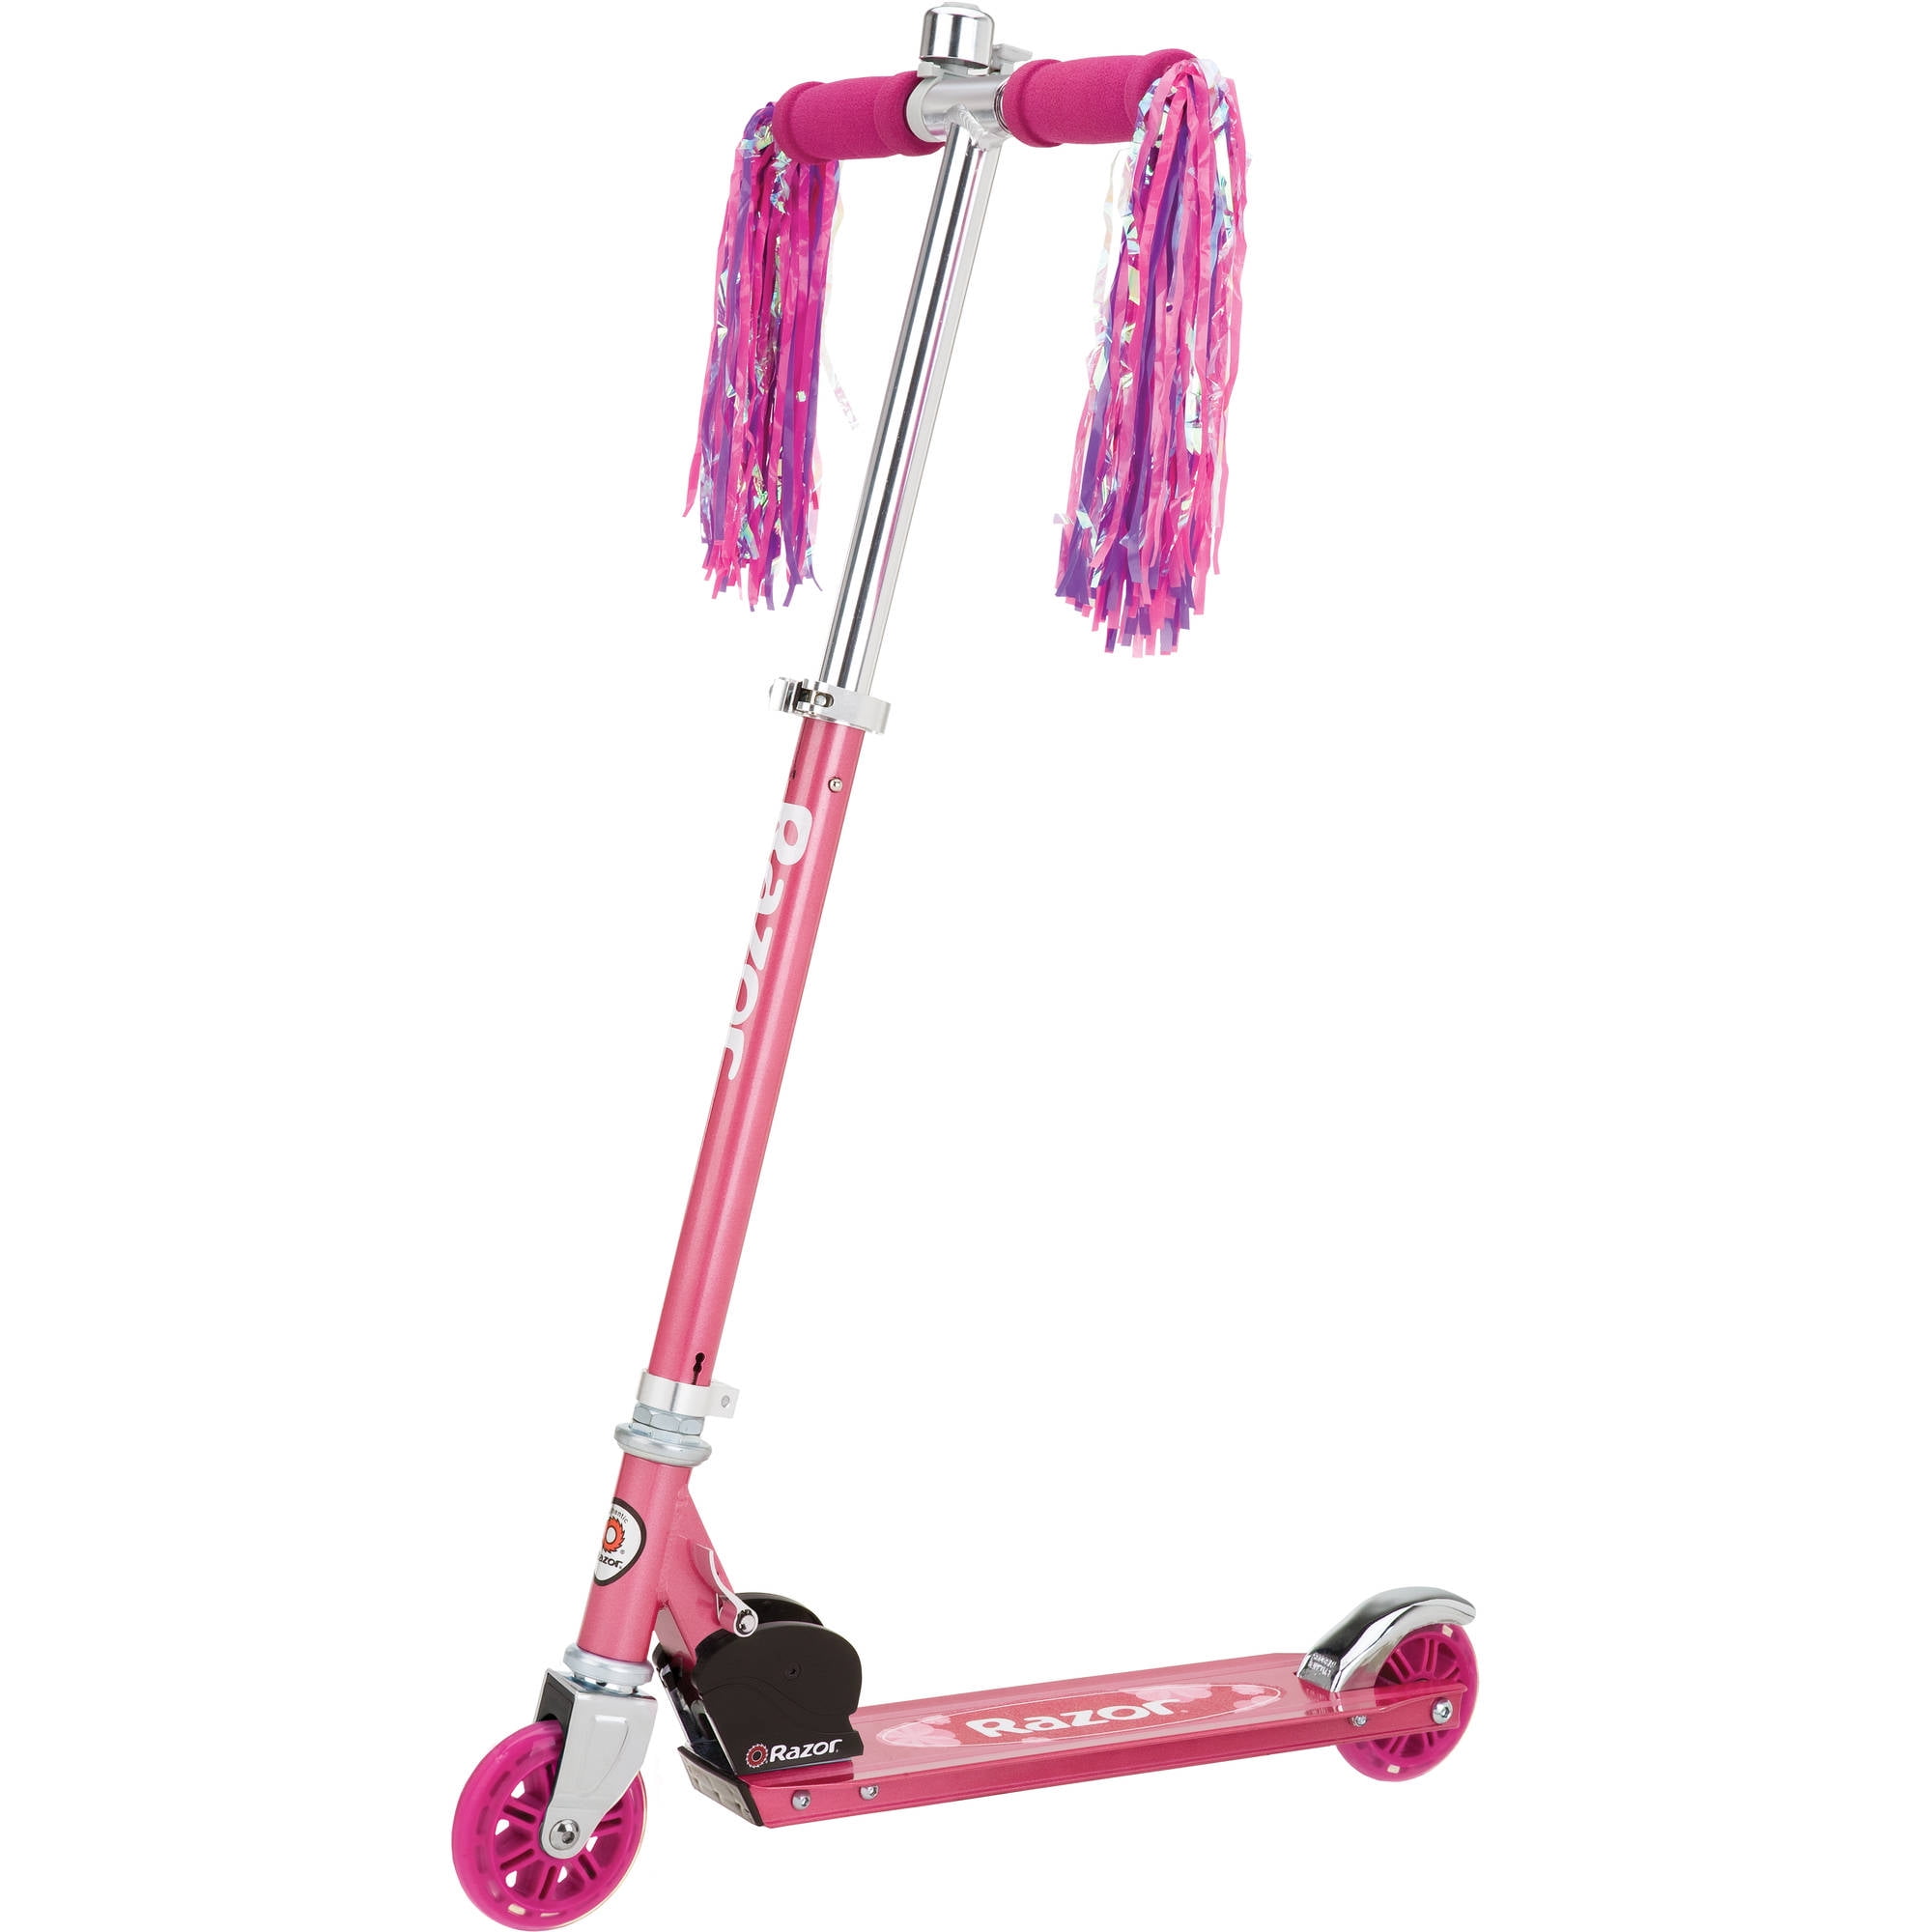 Razor A Kick Scooter for Kids - Sweet Pea, Lightweight, Foldable, Aluminum Frame, for Child Ages 5+ - Walmart.com